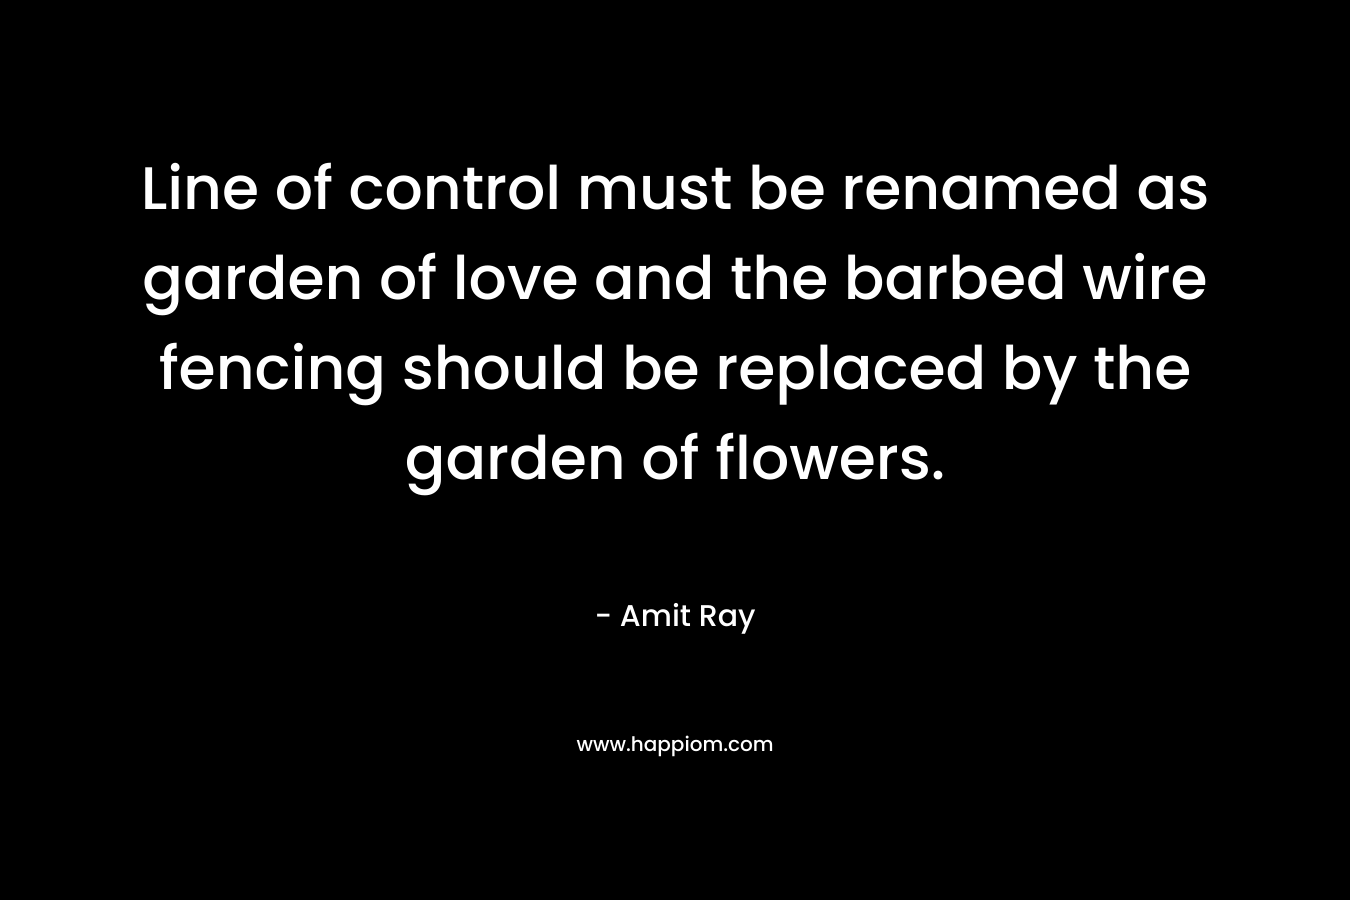 Line of control must be renamed as garden of love and the barbed wire fencing should be replaced by the garden of flowers. – Amit Ray